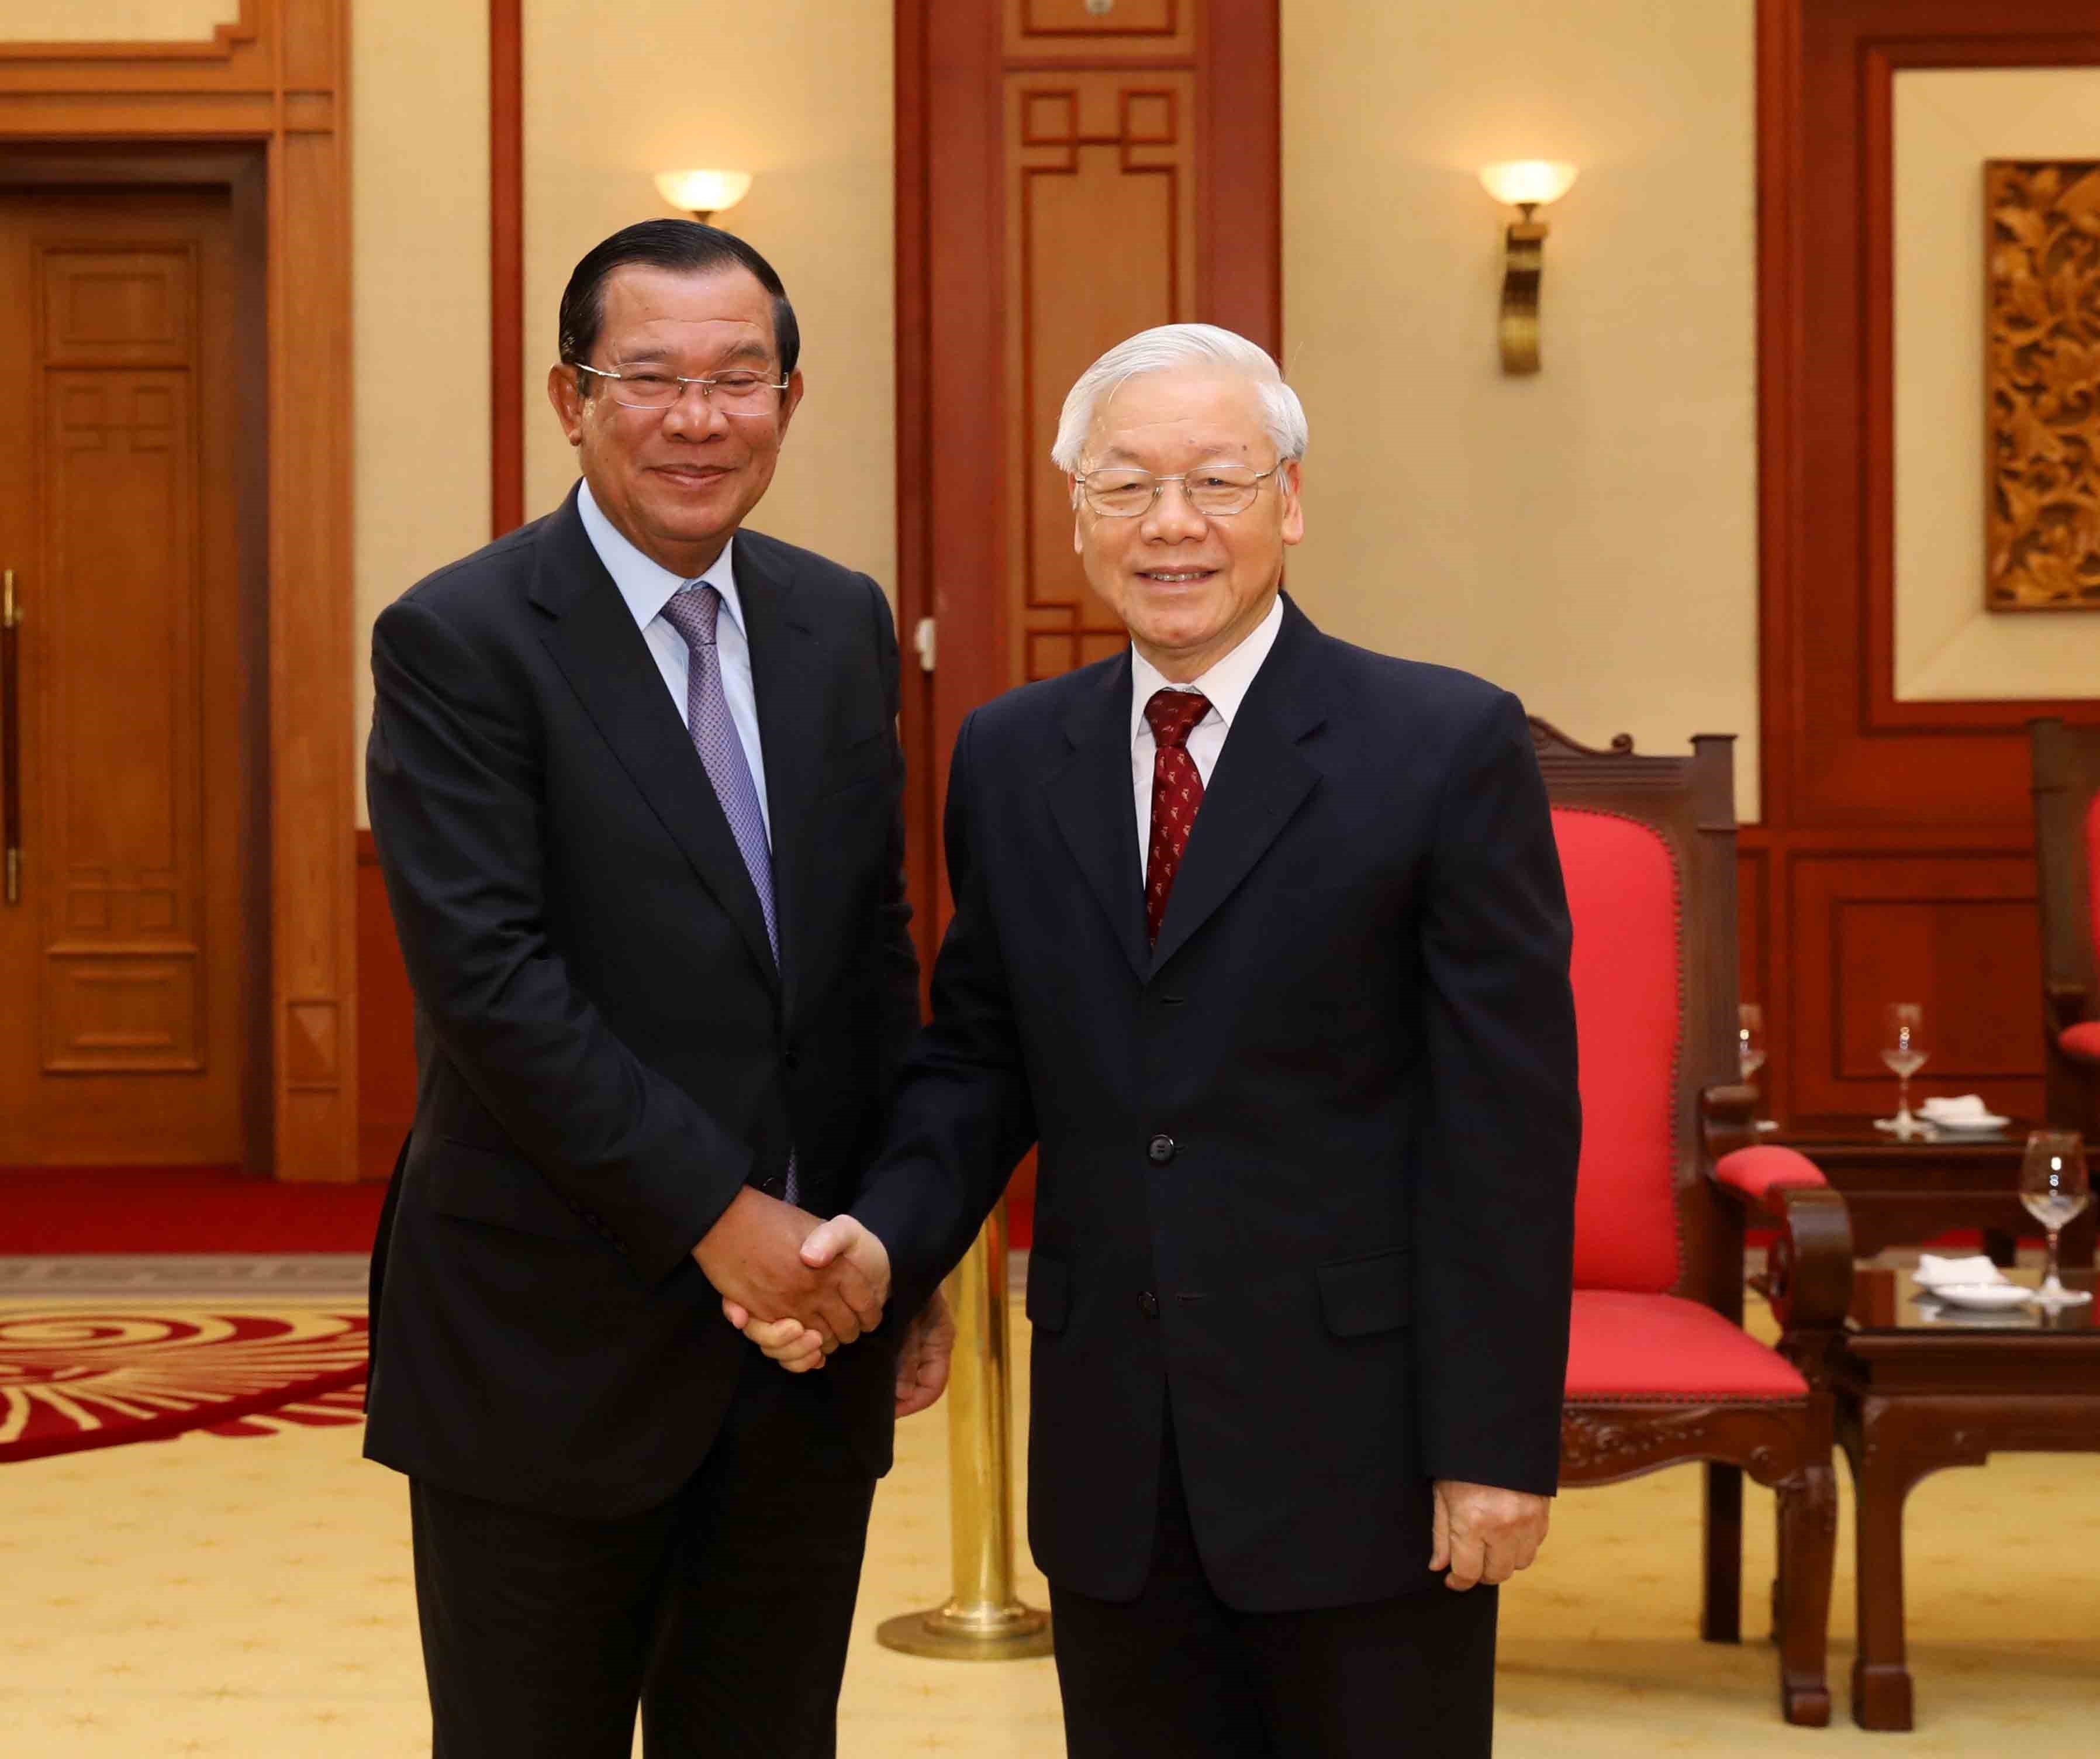 Cambodian Prime Minister Hun Sen (L) meets with Party General Secretary and President Nguyen Phu Trong as part of his visit to Vietnam in December 2018. (Photo: VNA)